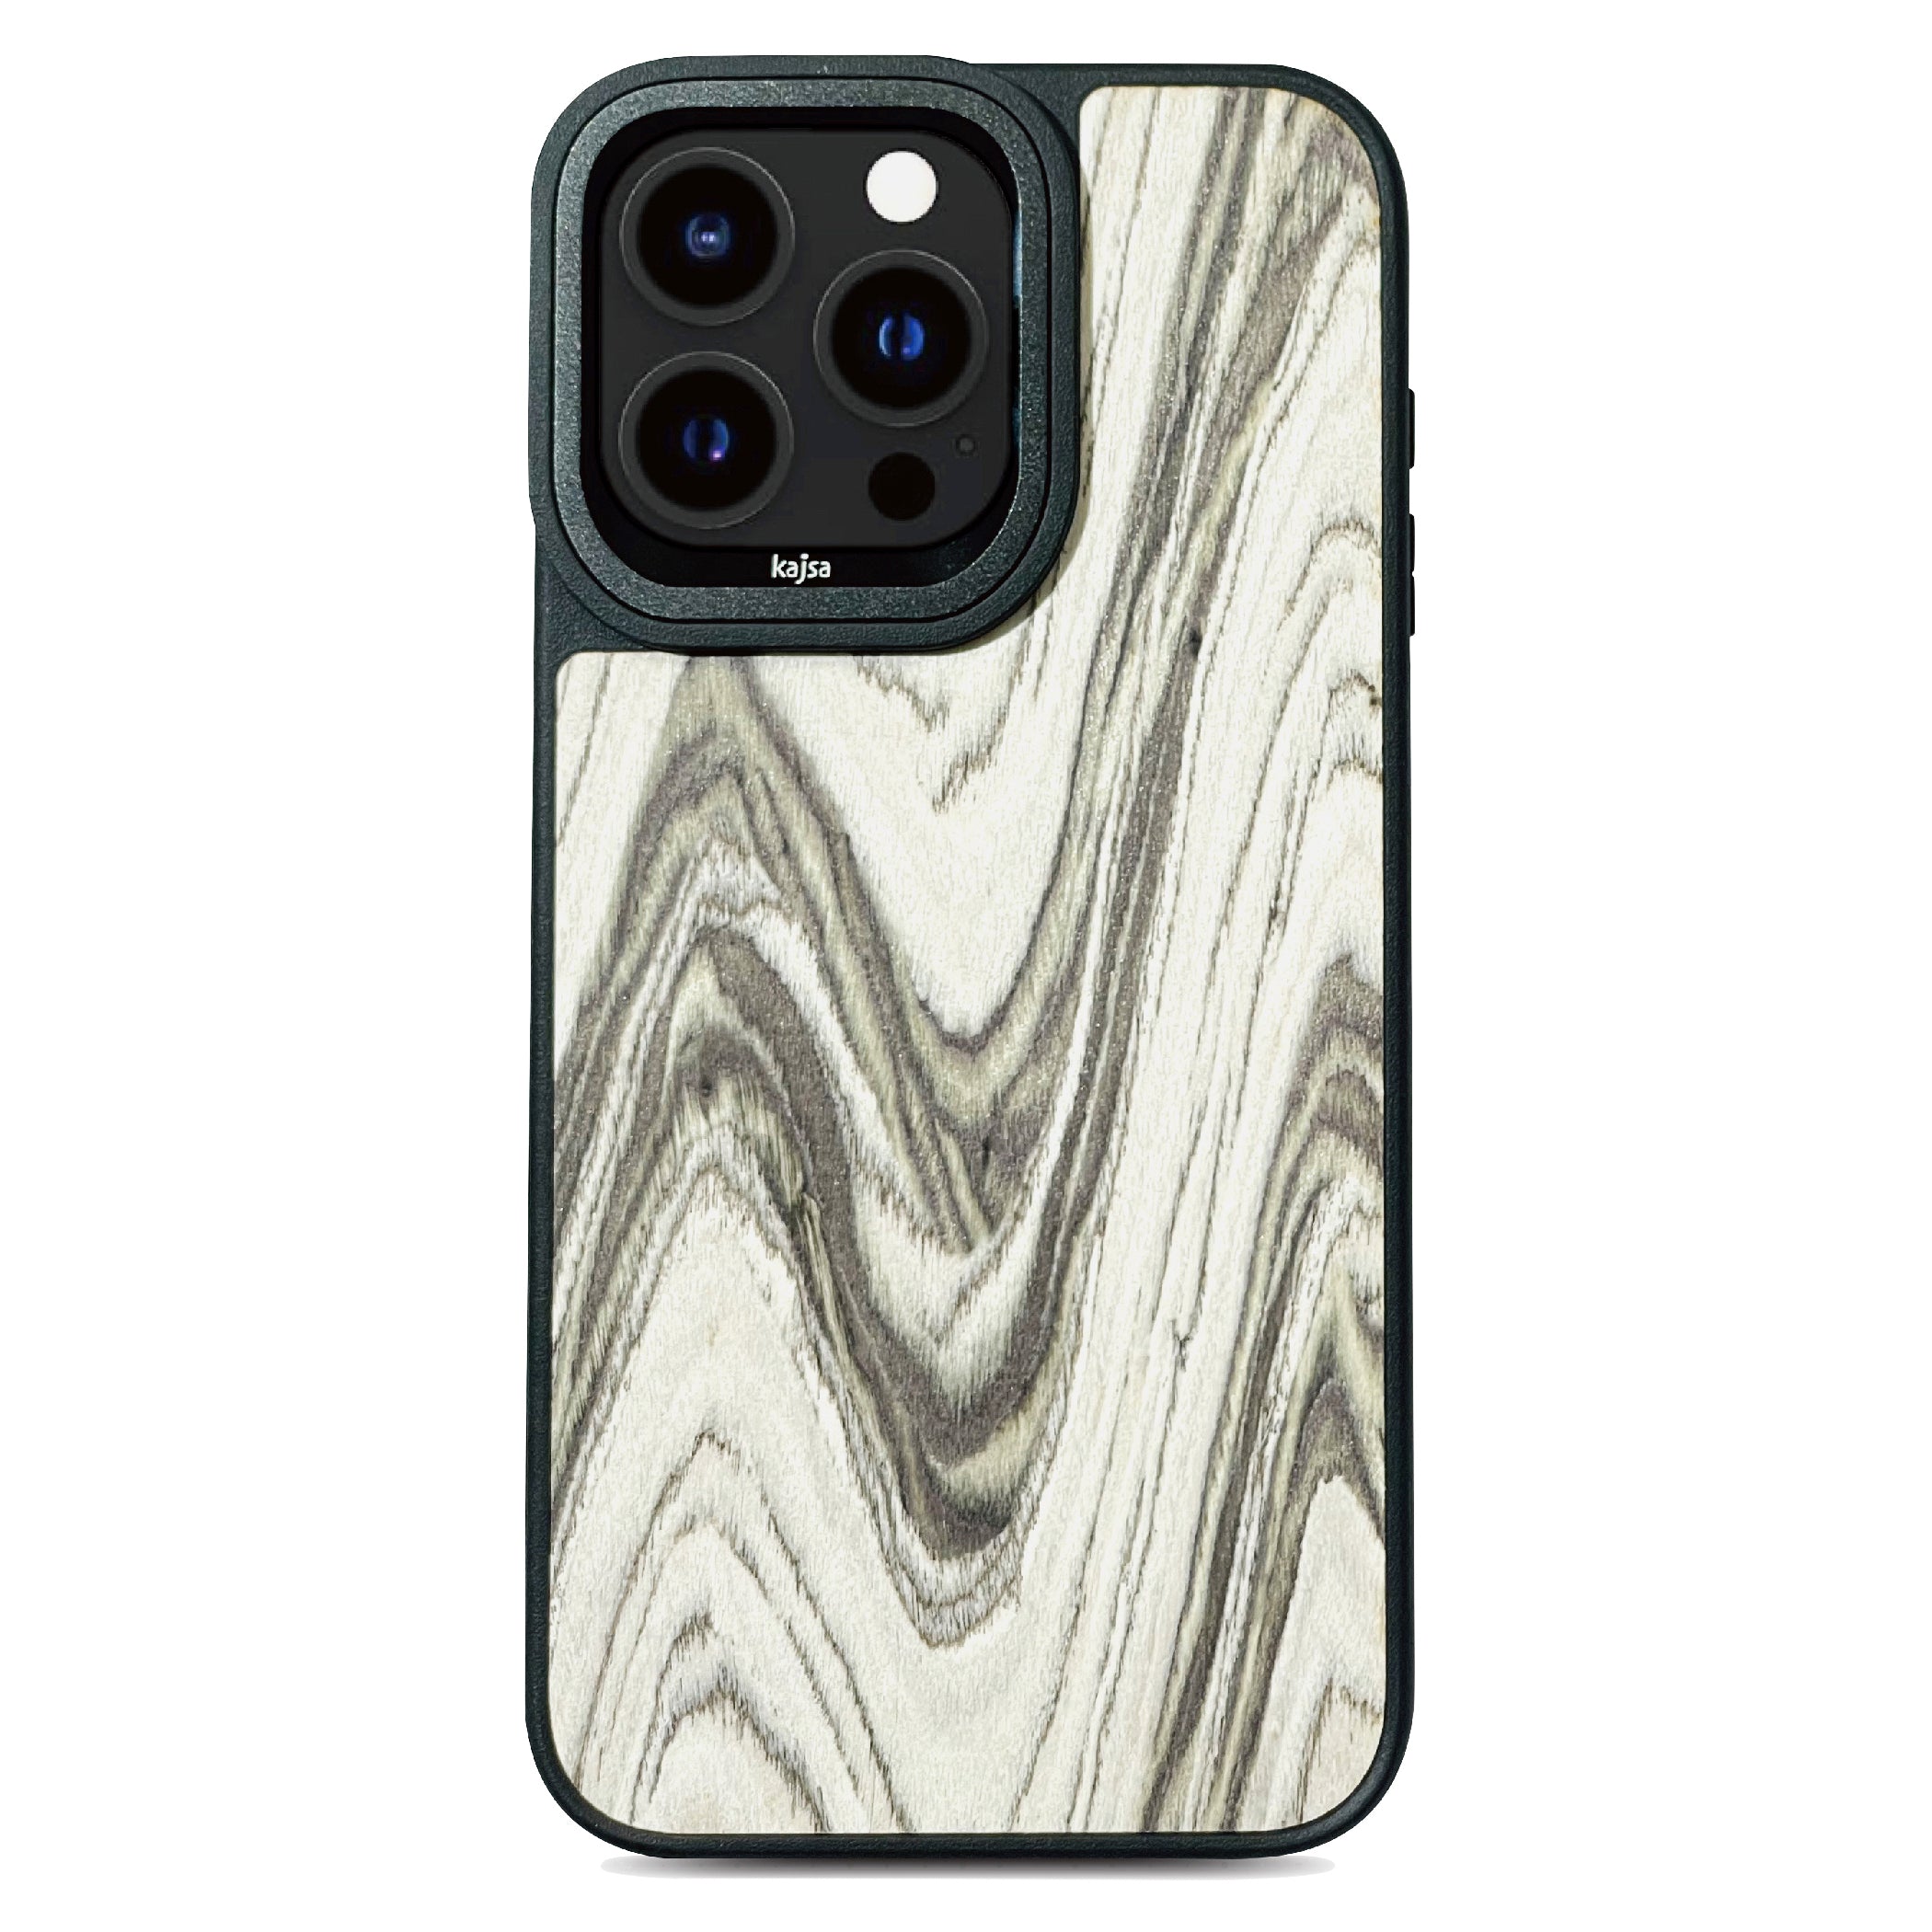 Outdoor Collection - Fancy Wood Back Case for iPhone 15